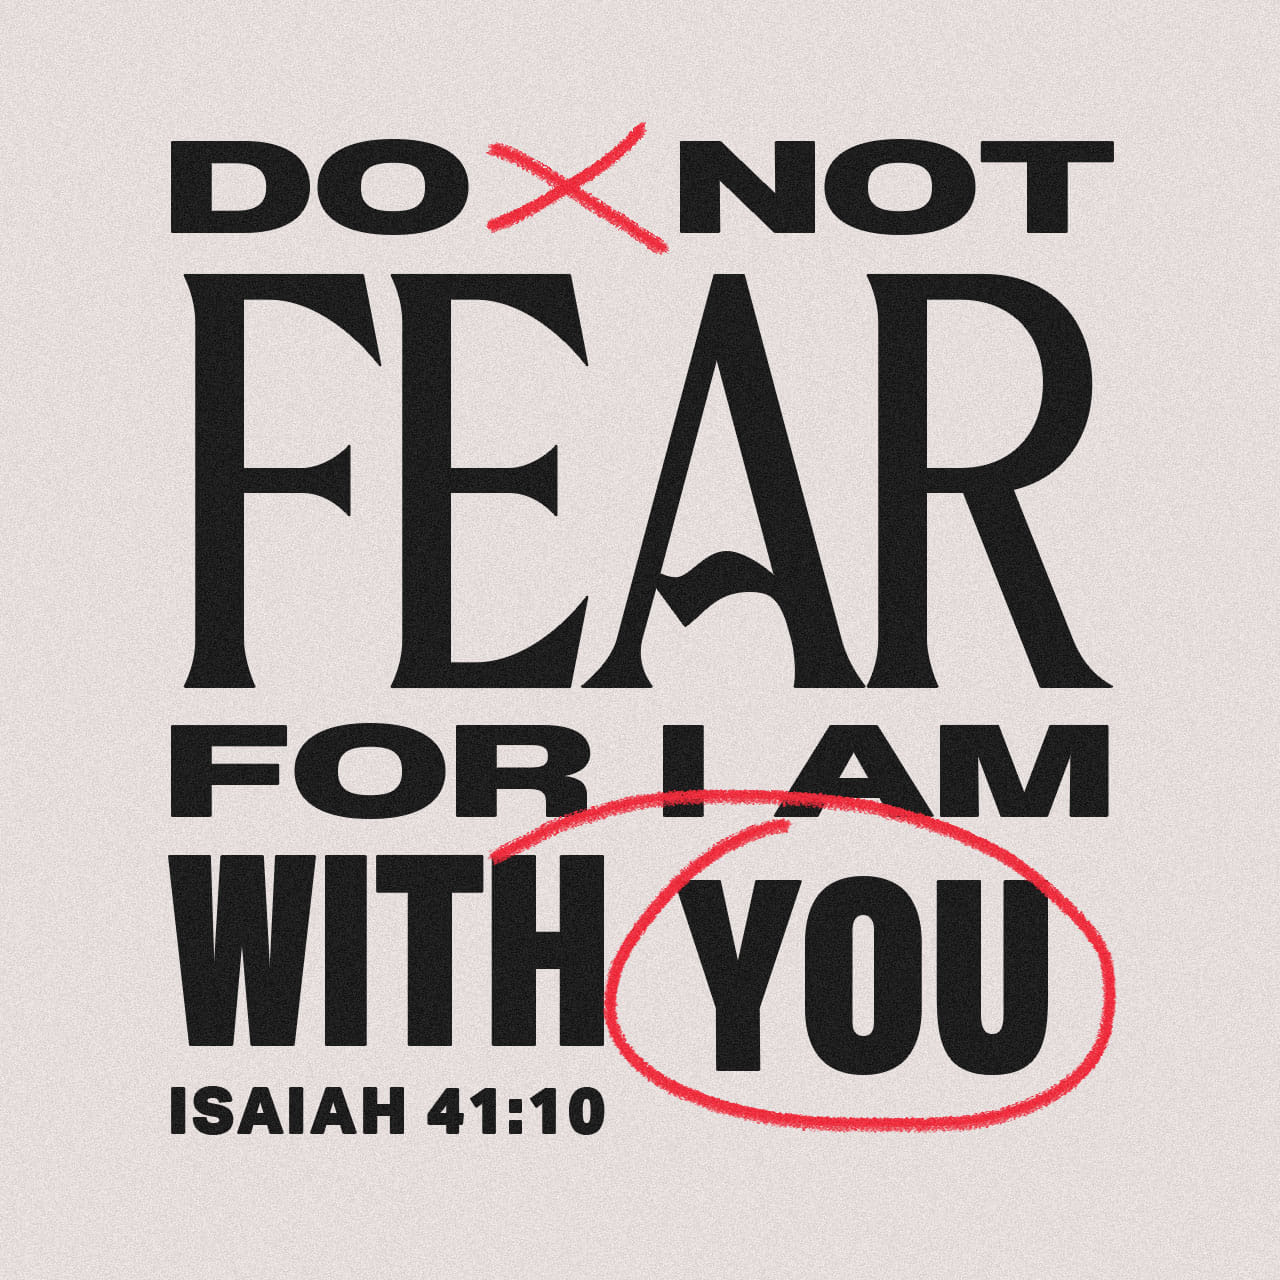 Do not fear for I am with you. - Isaiah 41:10 - Verse Image